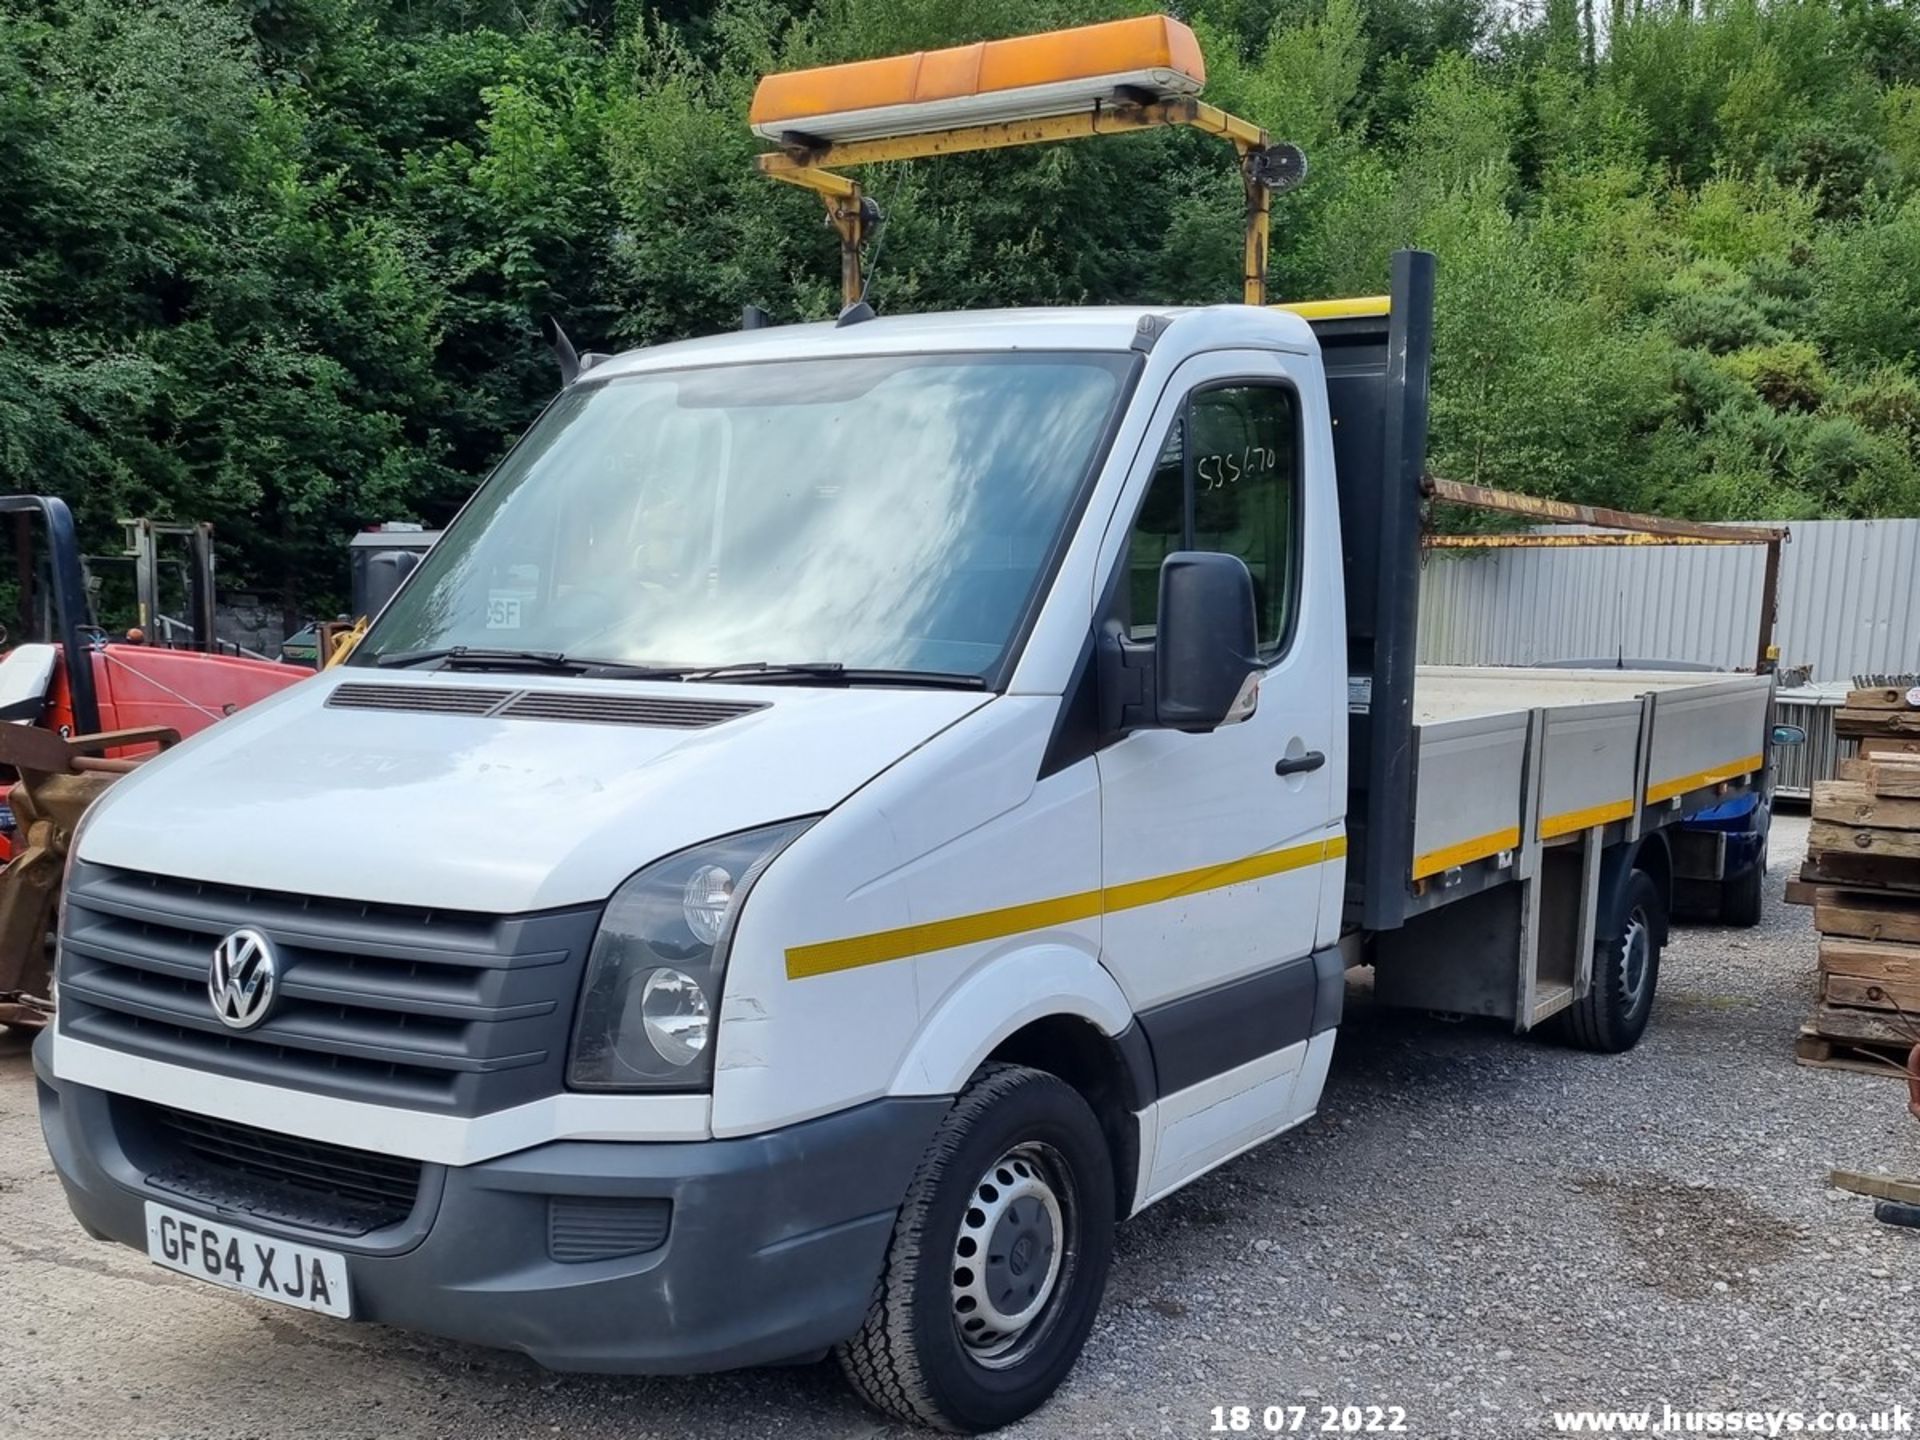 14/64 VOLKSWAGEN CRAFTER CR35 TDI - 1968cc 2dr Flat Bed (White, 221k)